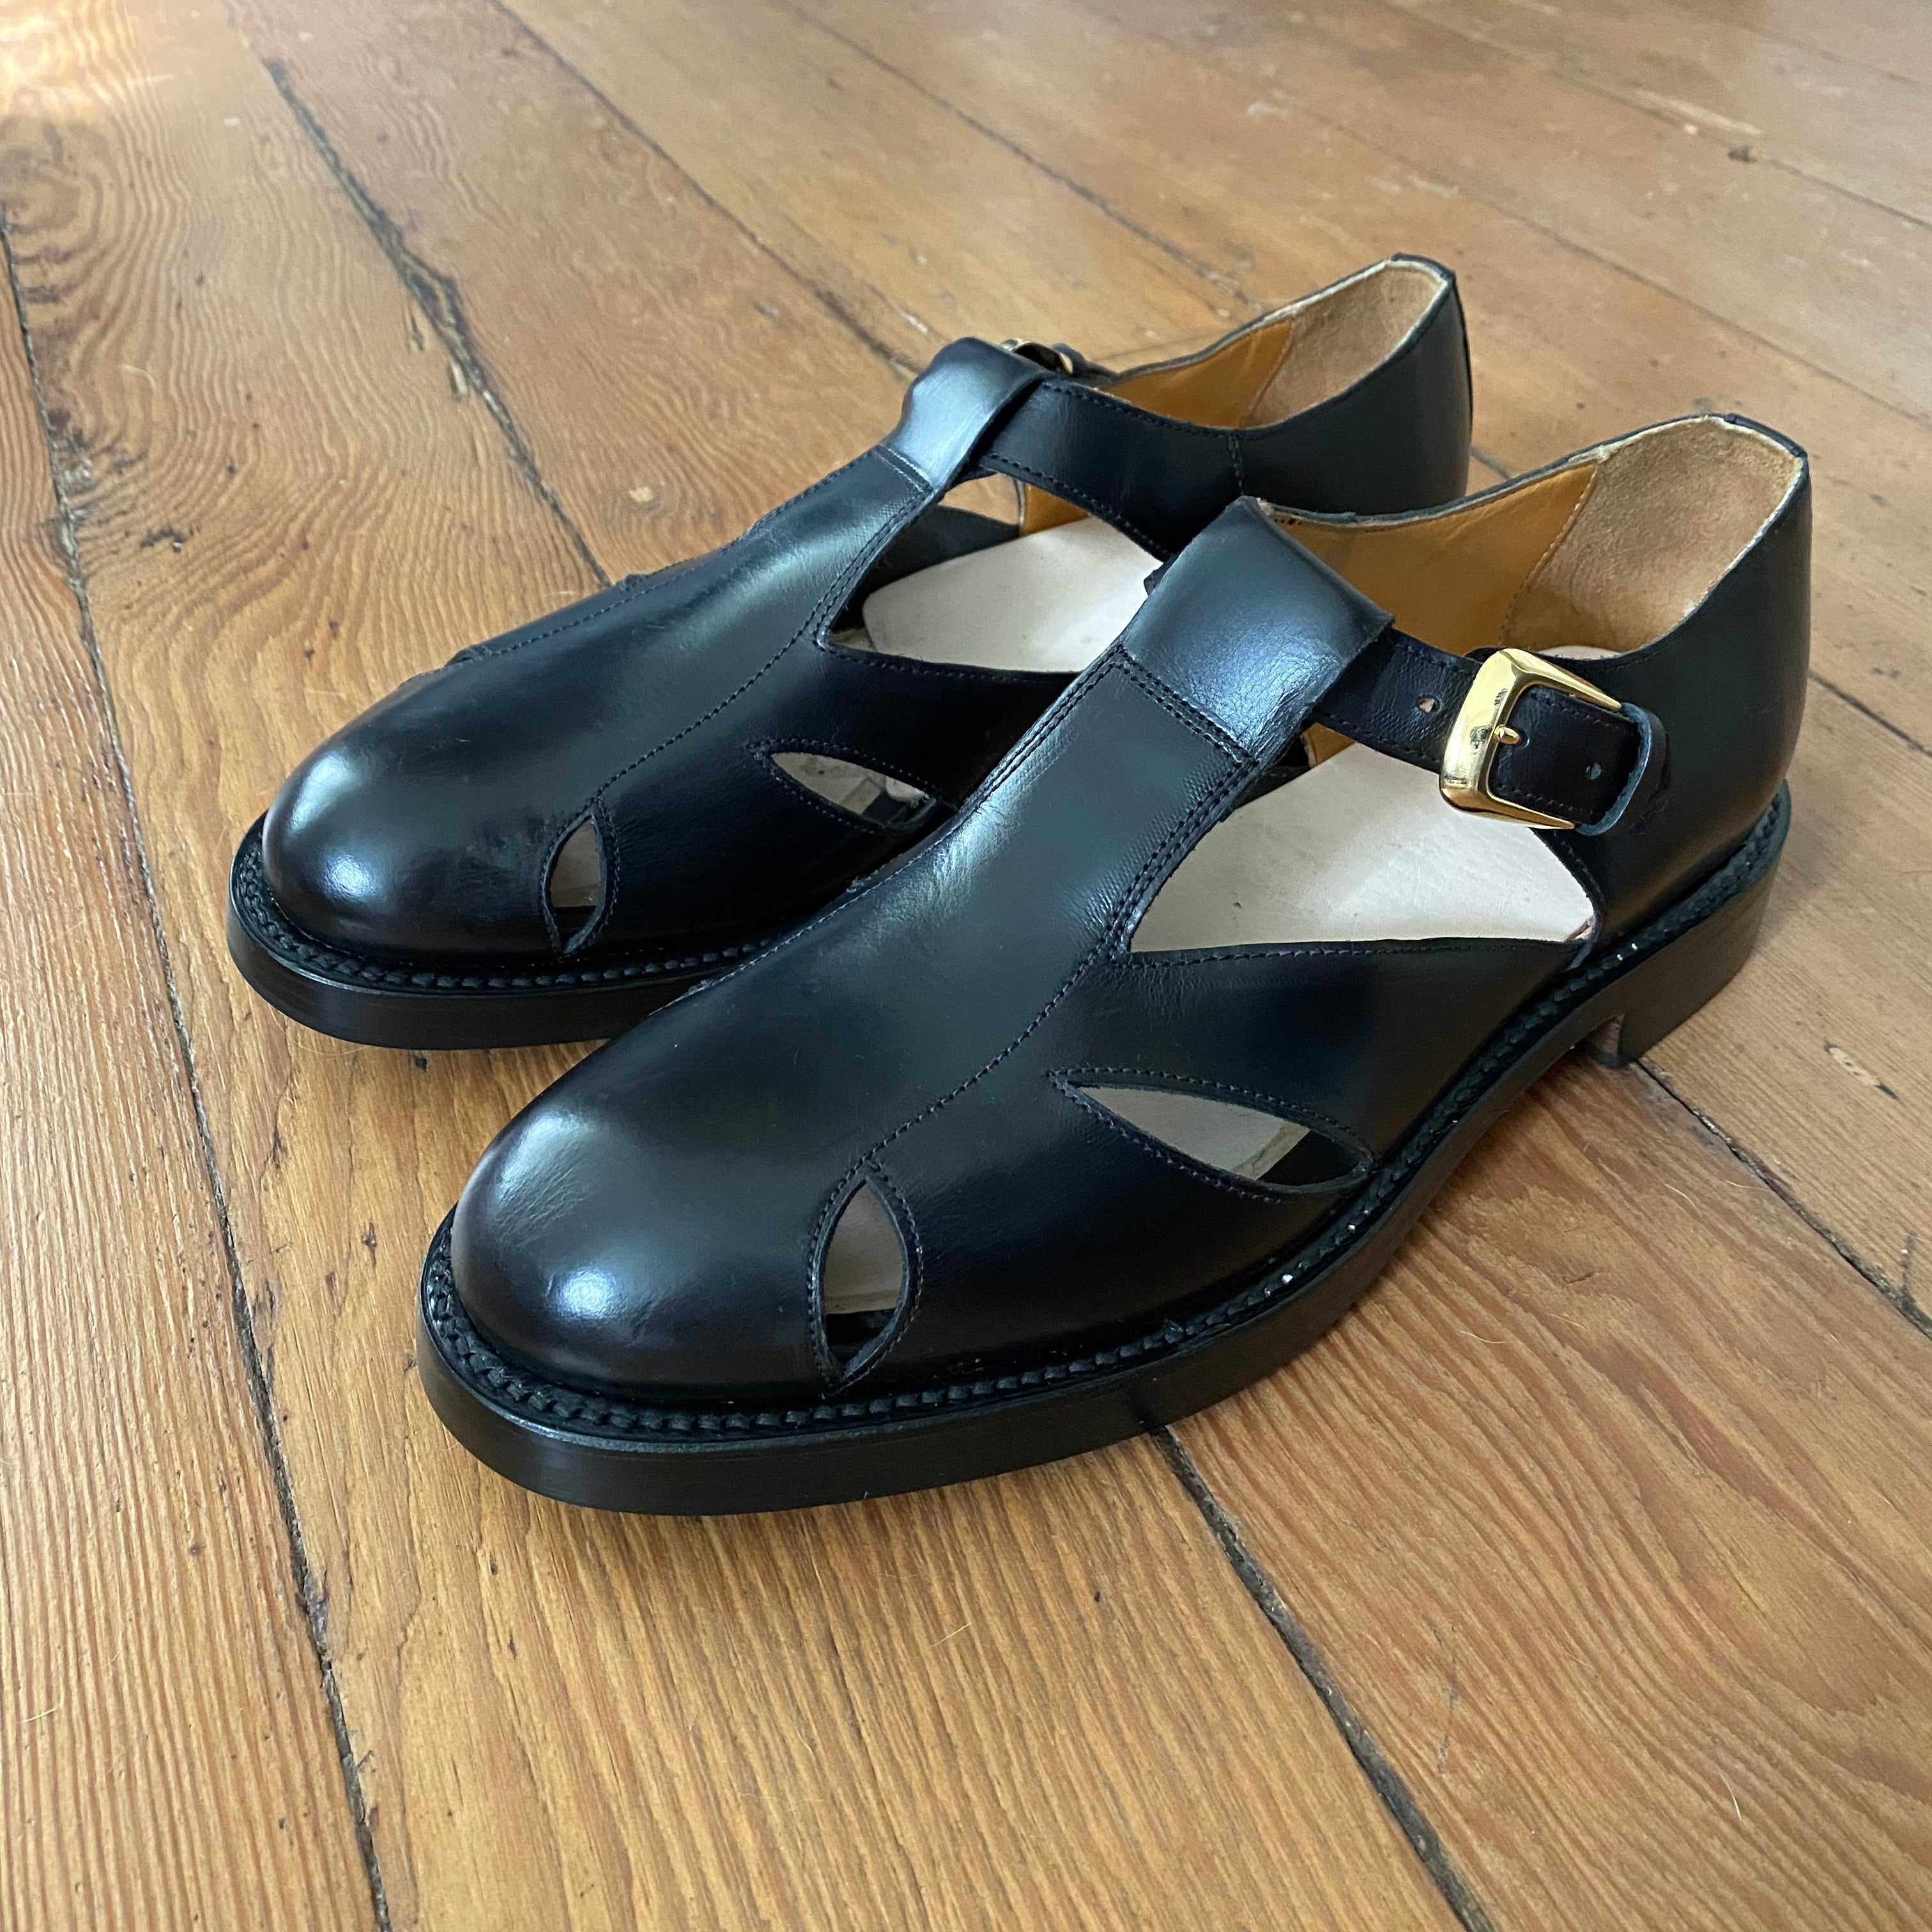 Autumn Sandal - Black Leather – 2120 Handcrafted